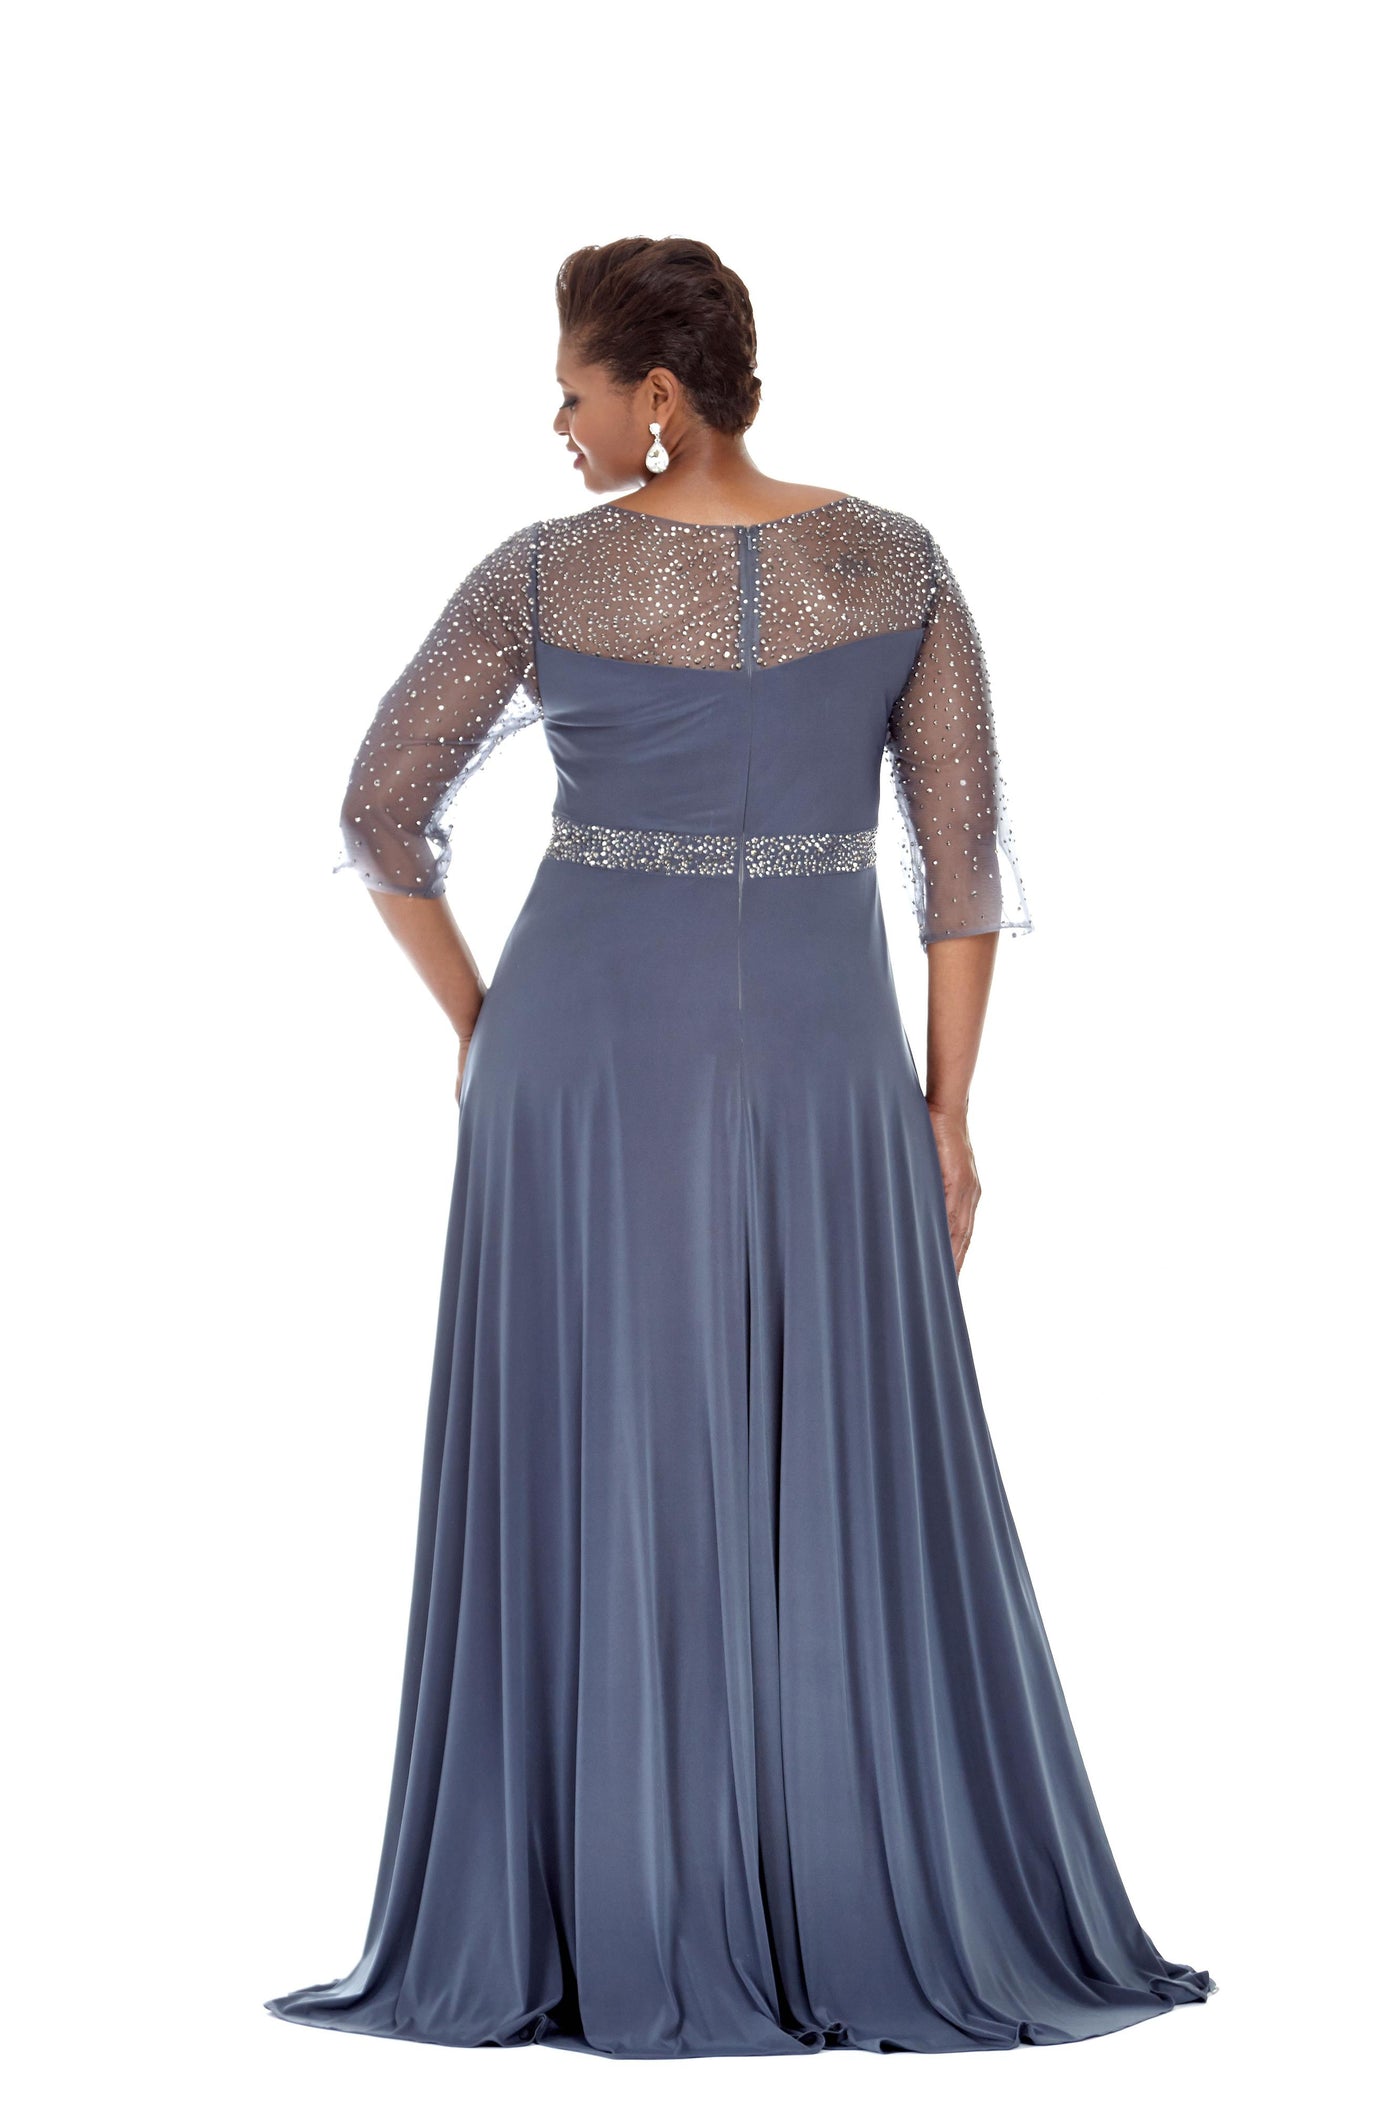 Vintage Style Elegant Evening Gown by Sydney's Closet - SOLD OUT